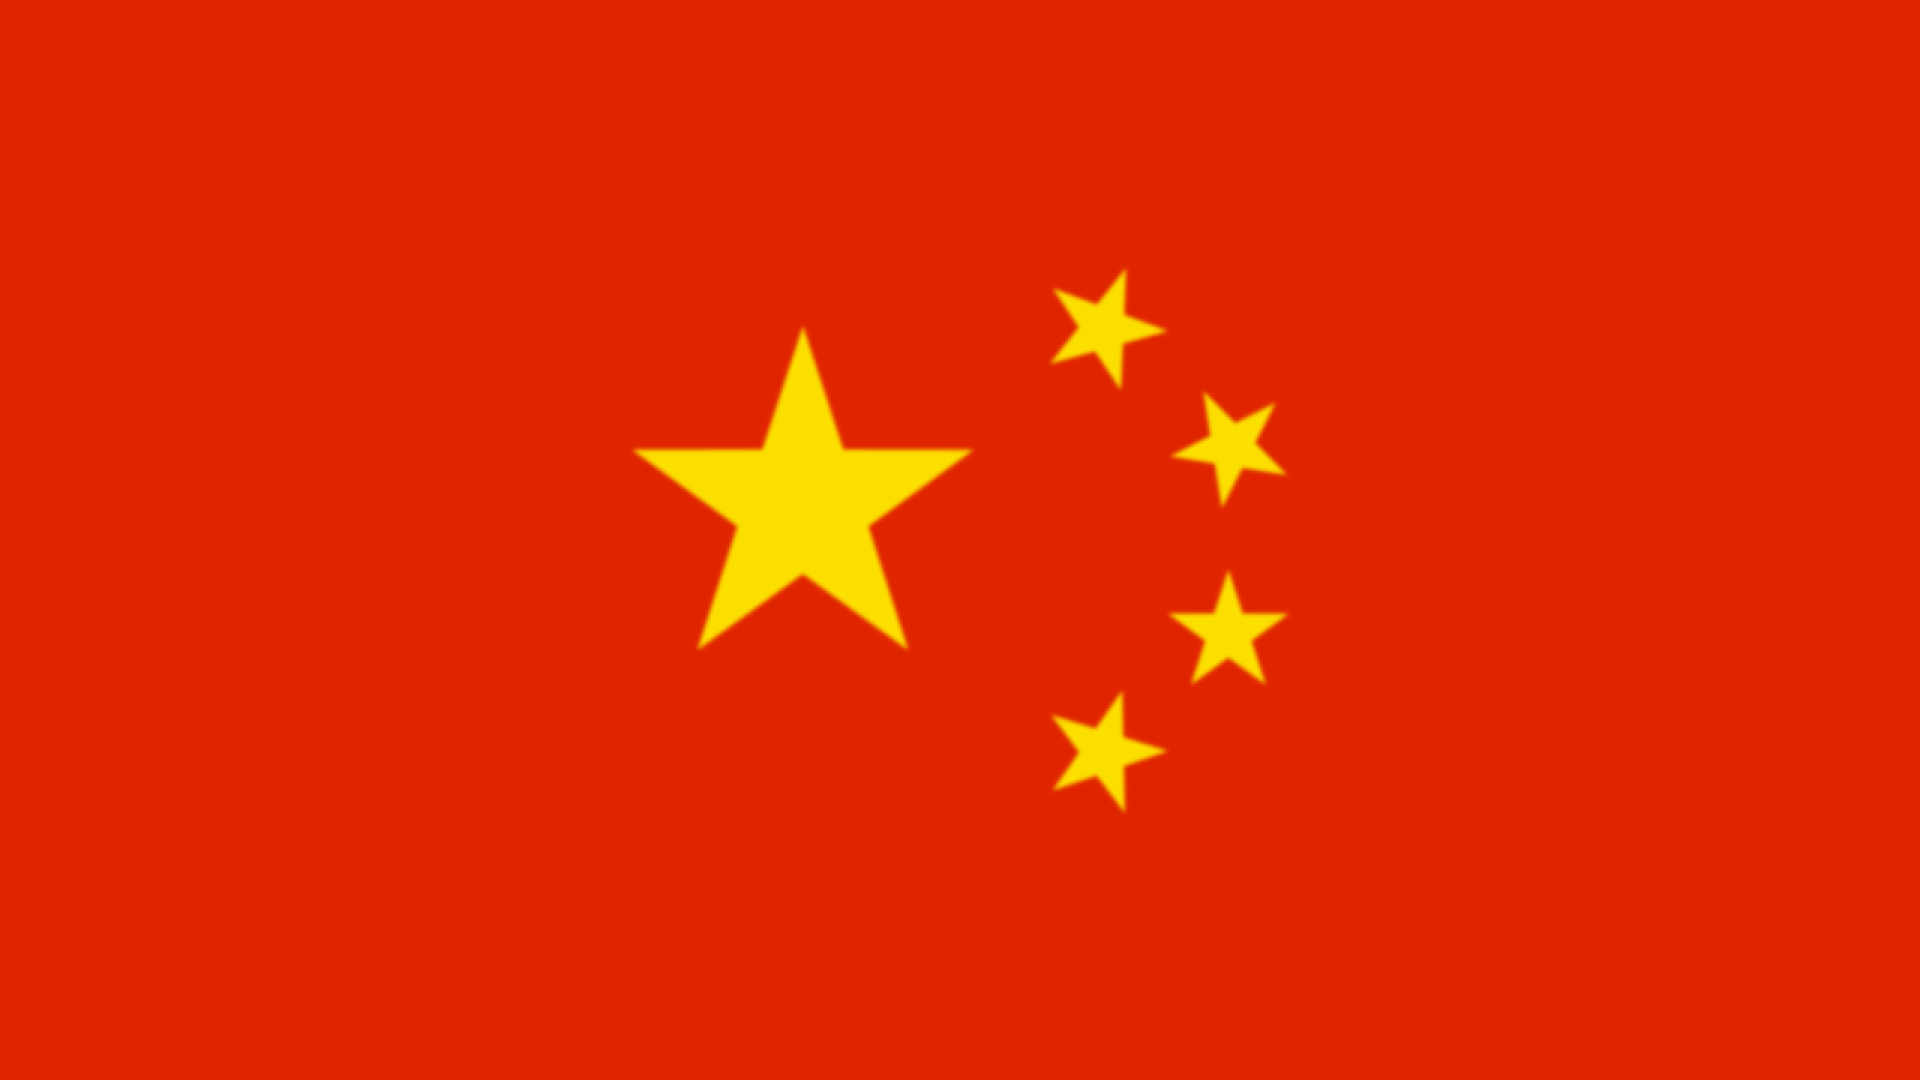 Illustration of a blurry Chinese flag